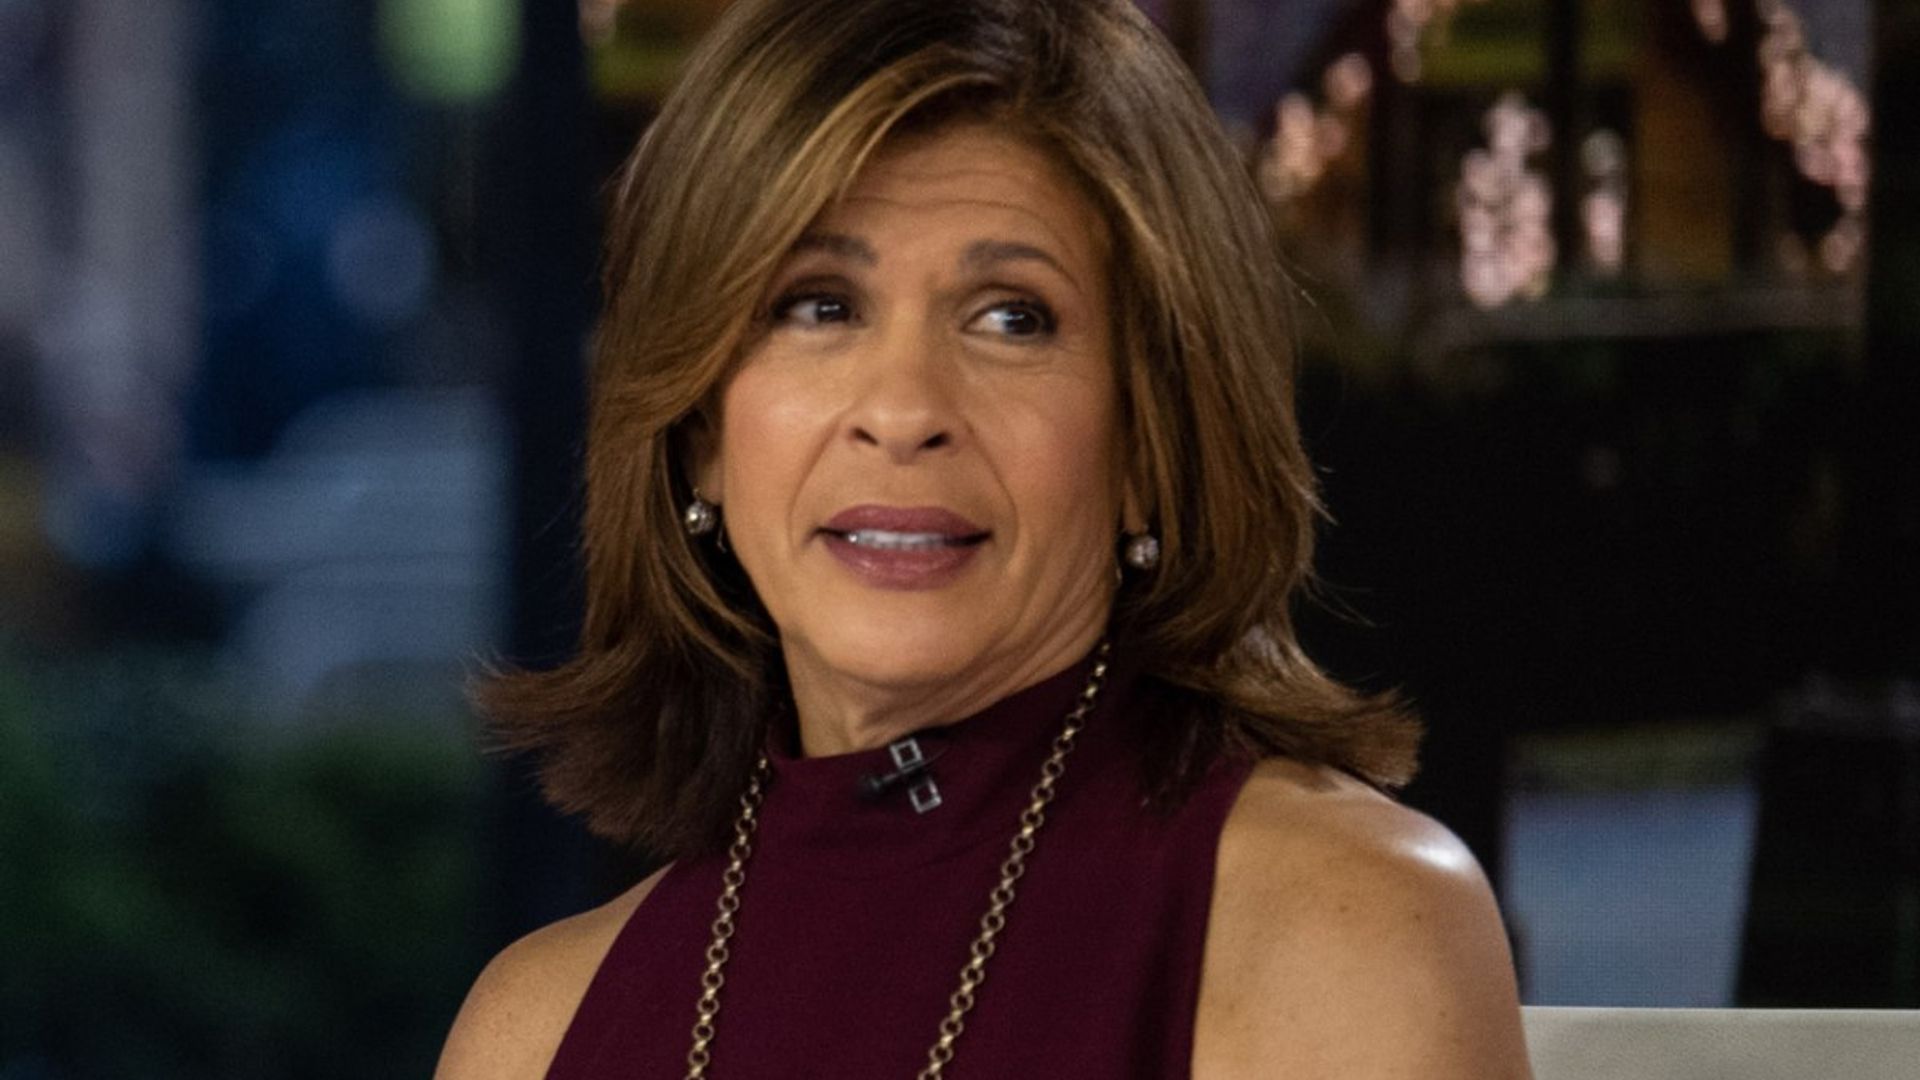 Hoda Kotb tears up as she returns to Today following daughter's health battle